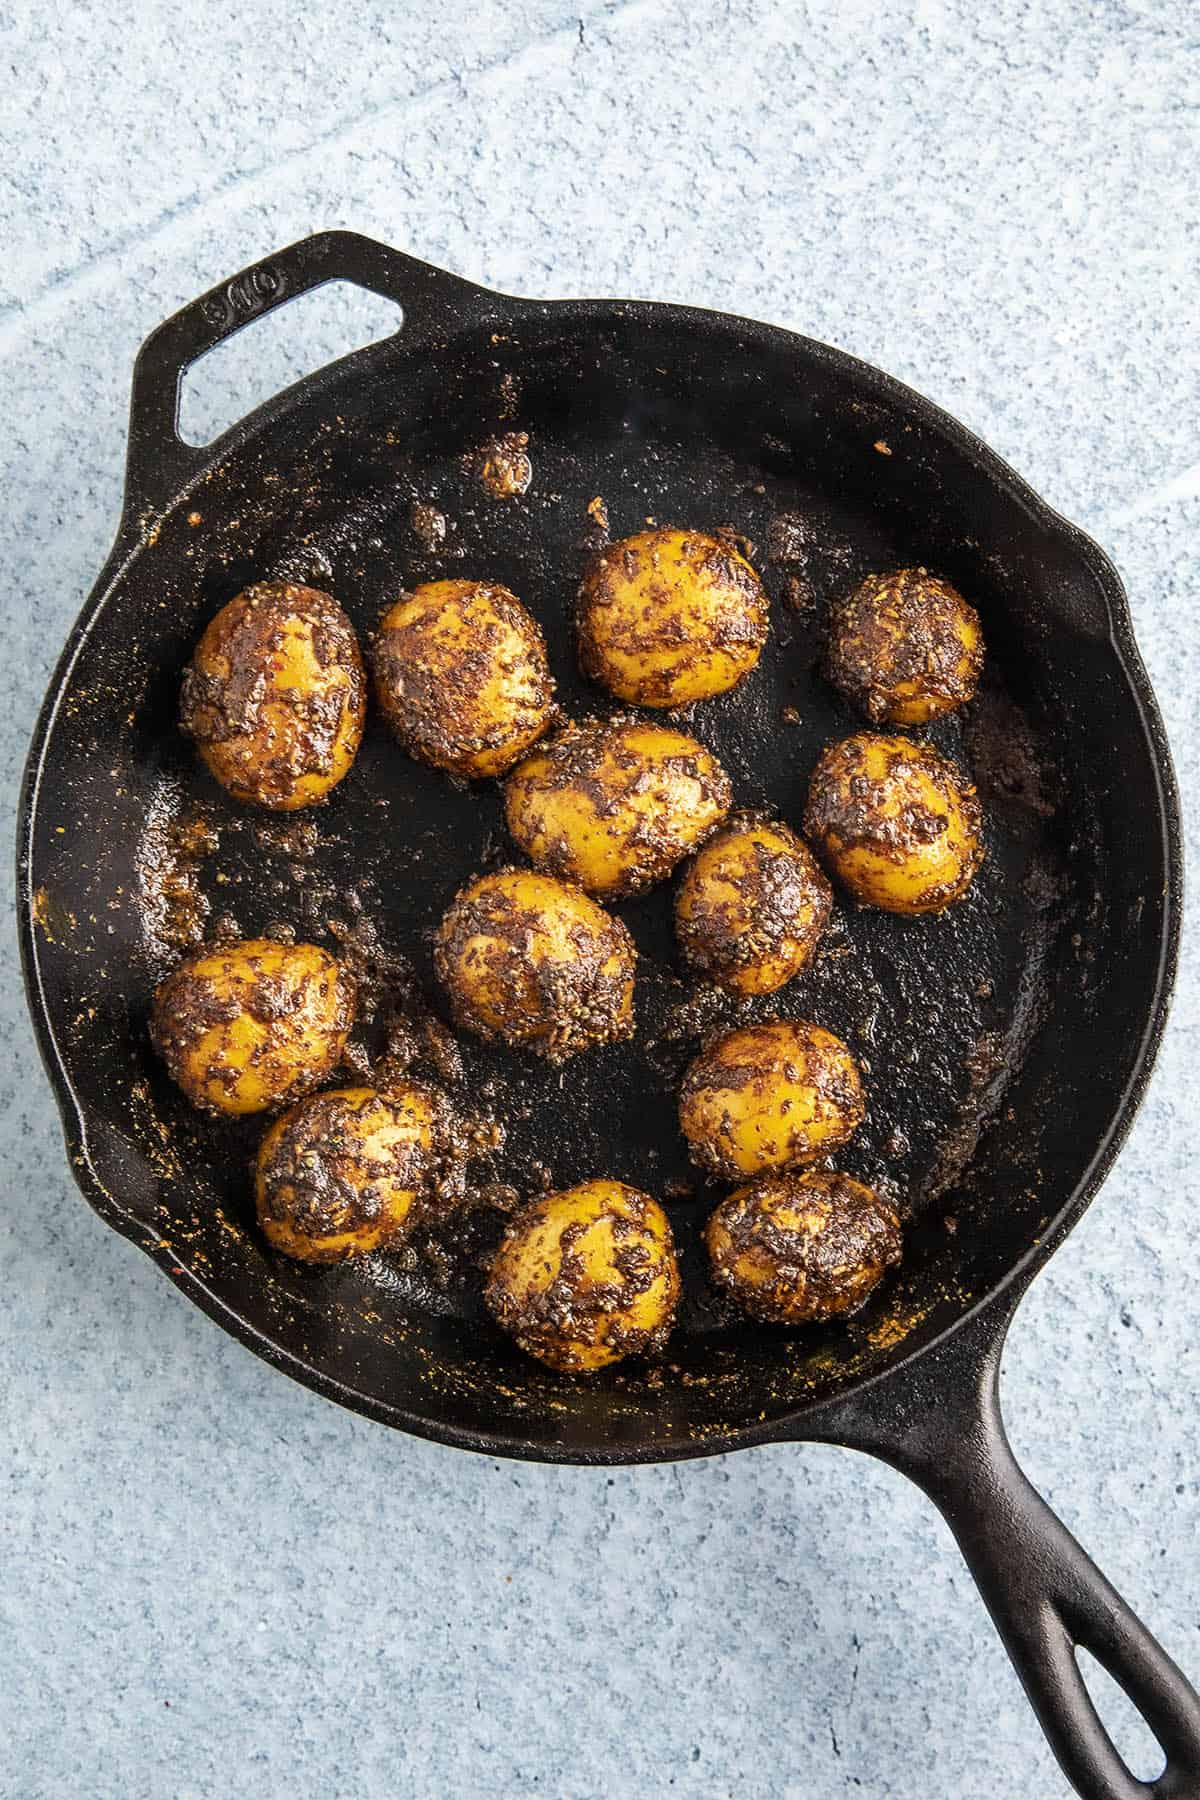 Finishing the Bombay Potatoes in a hot pan